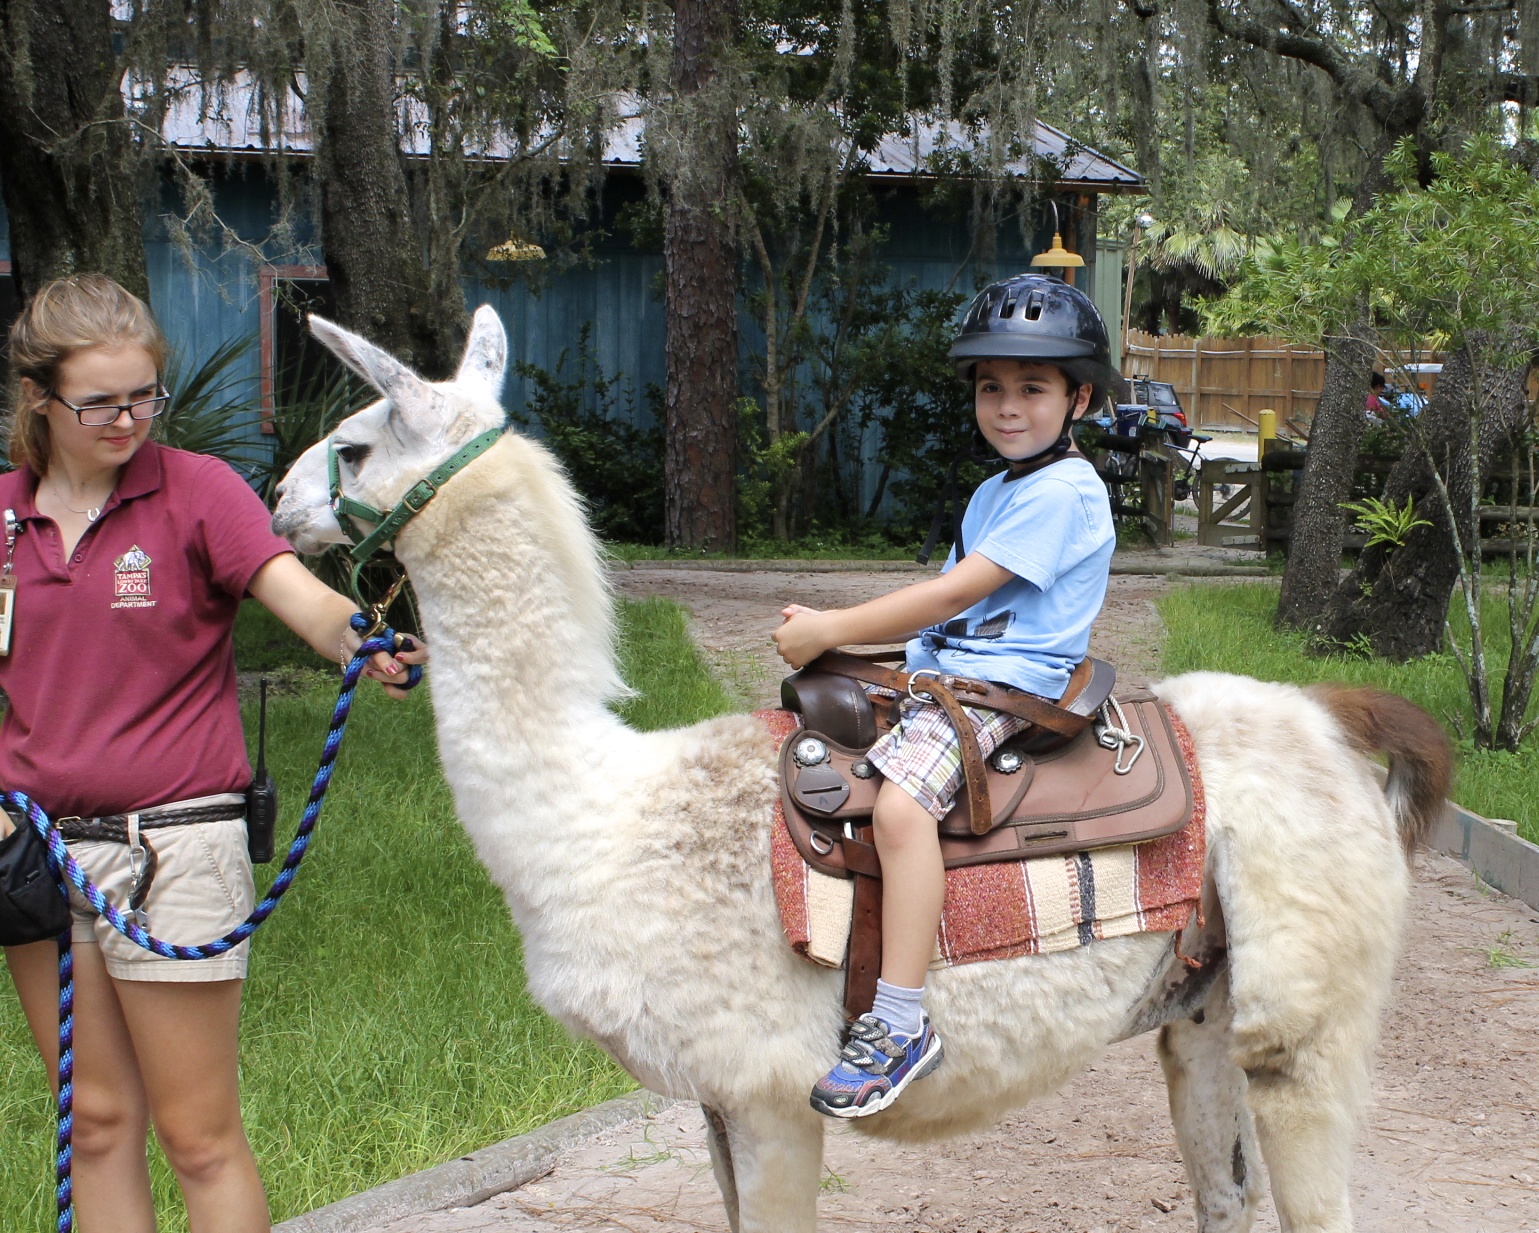 riding a llama at the Lowry Park Zoo Tampa